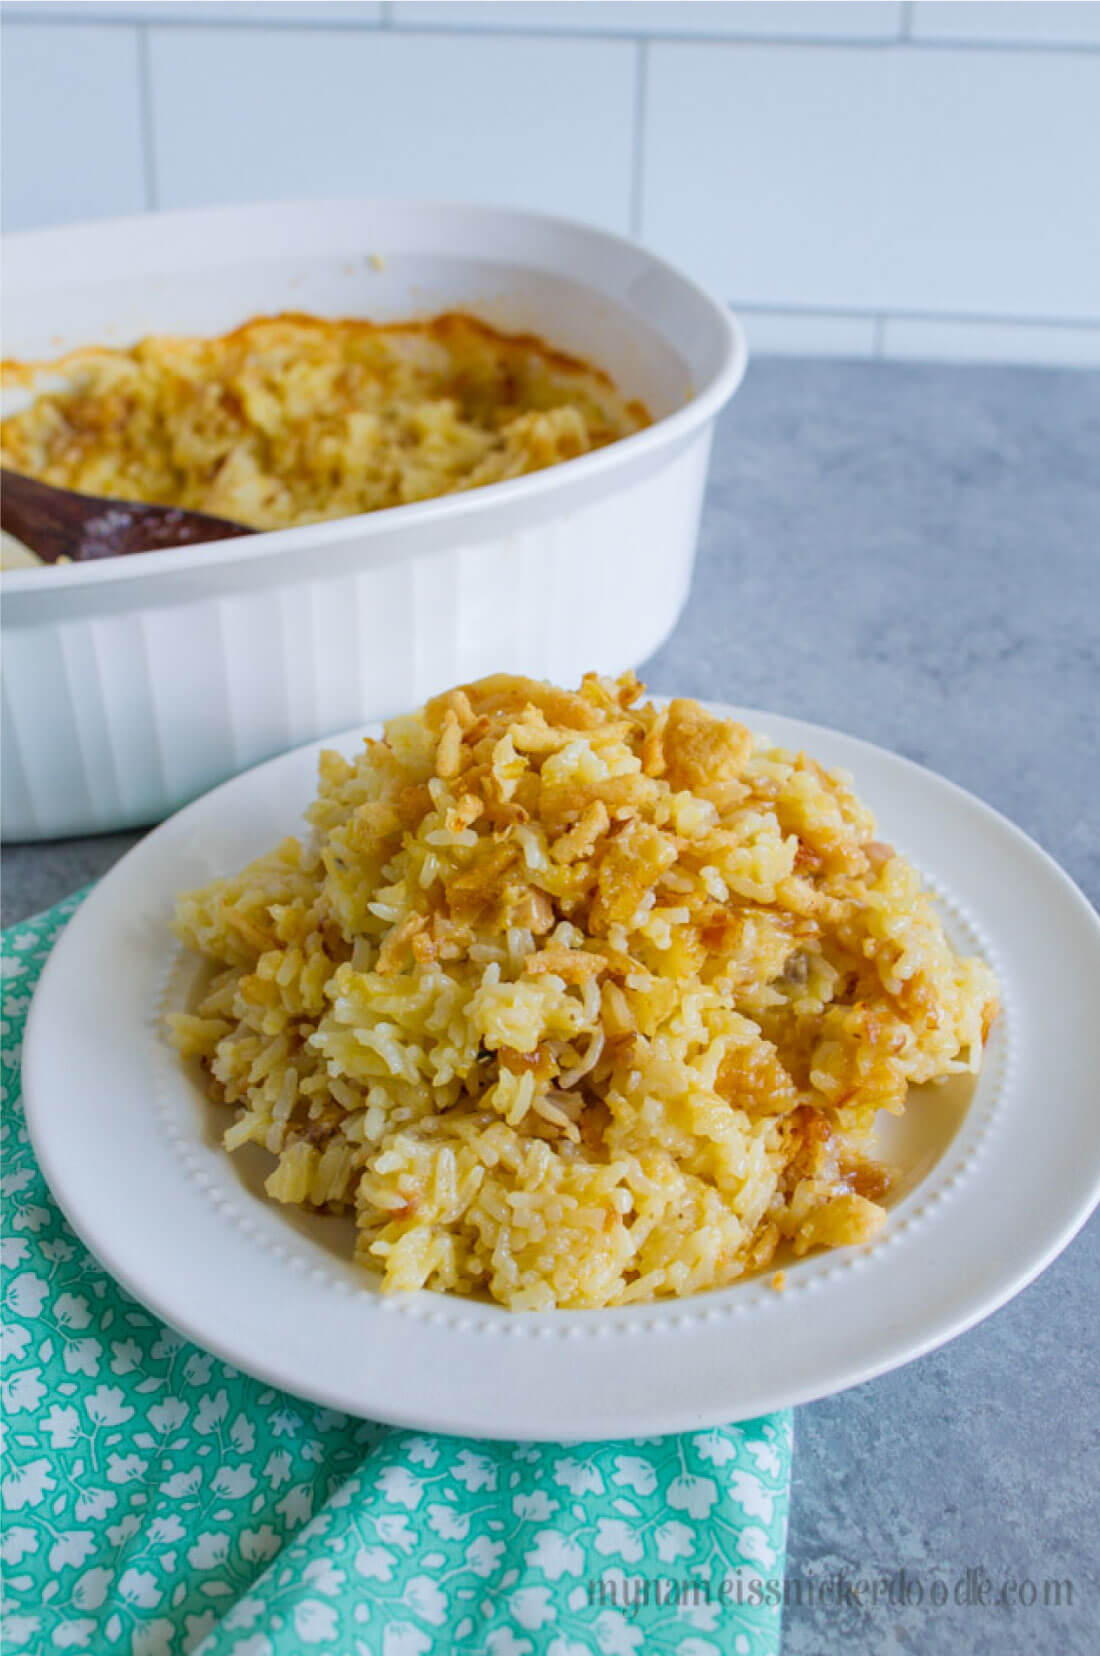 One of the best rice dishes - creamy rice. It's easy and tastes amazing. From My Name is Snickerdoodle via thirtyhandmadedays.com